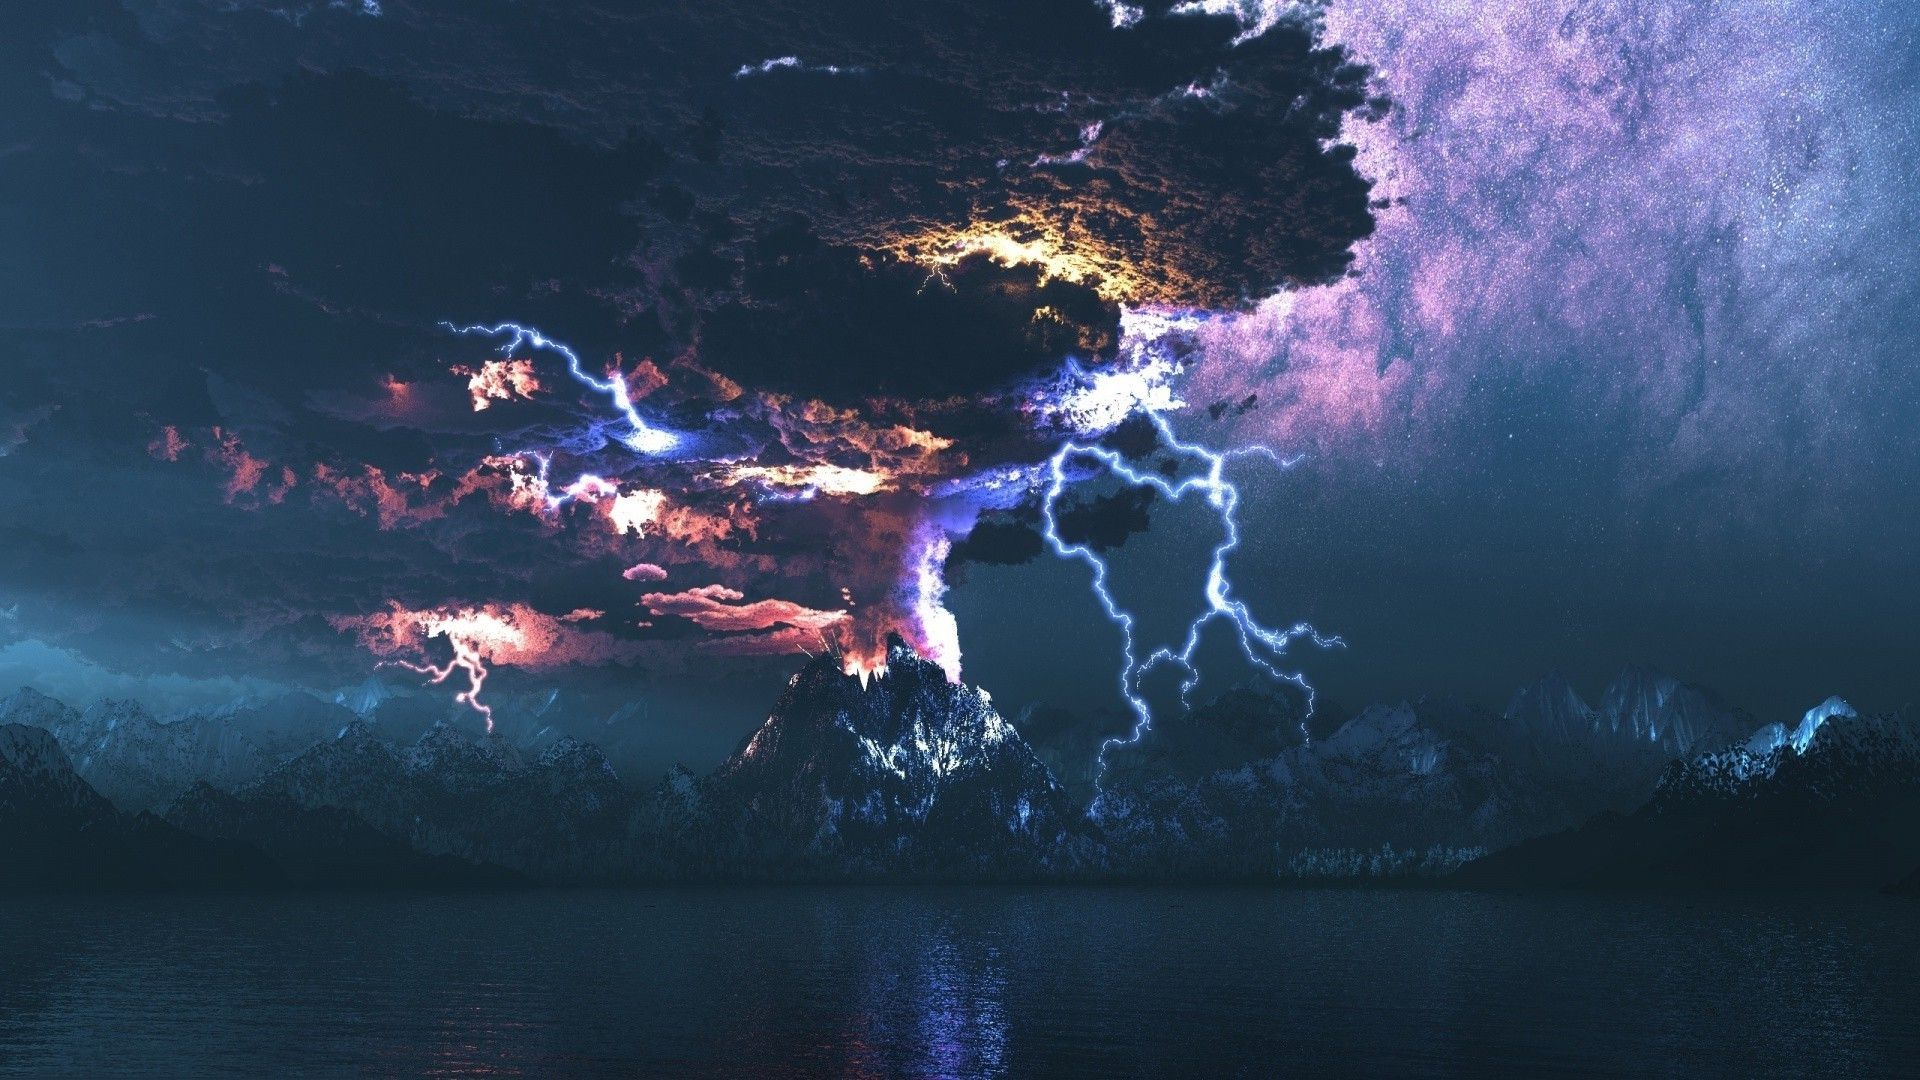 An image of a volcano with lightning coming out of it - Lightning, storm